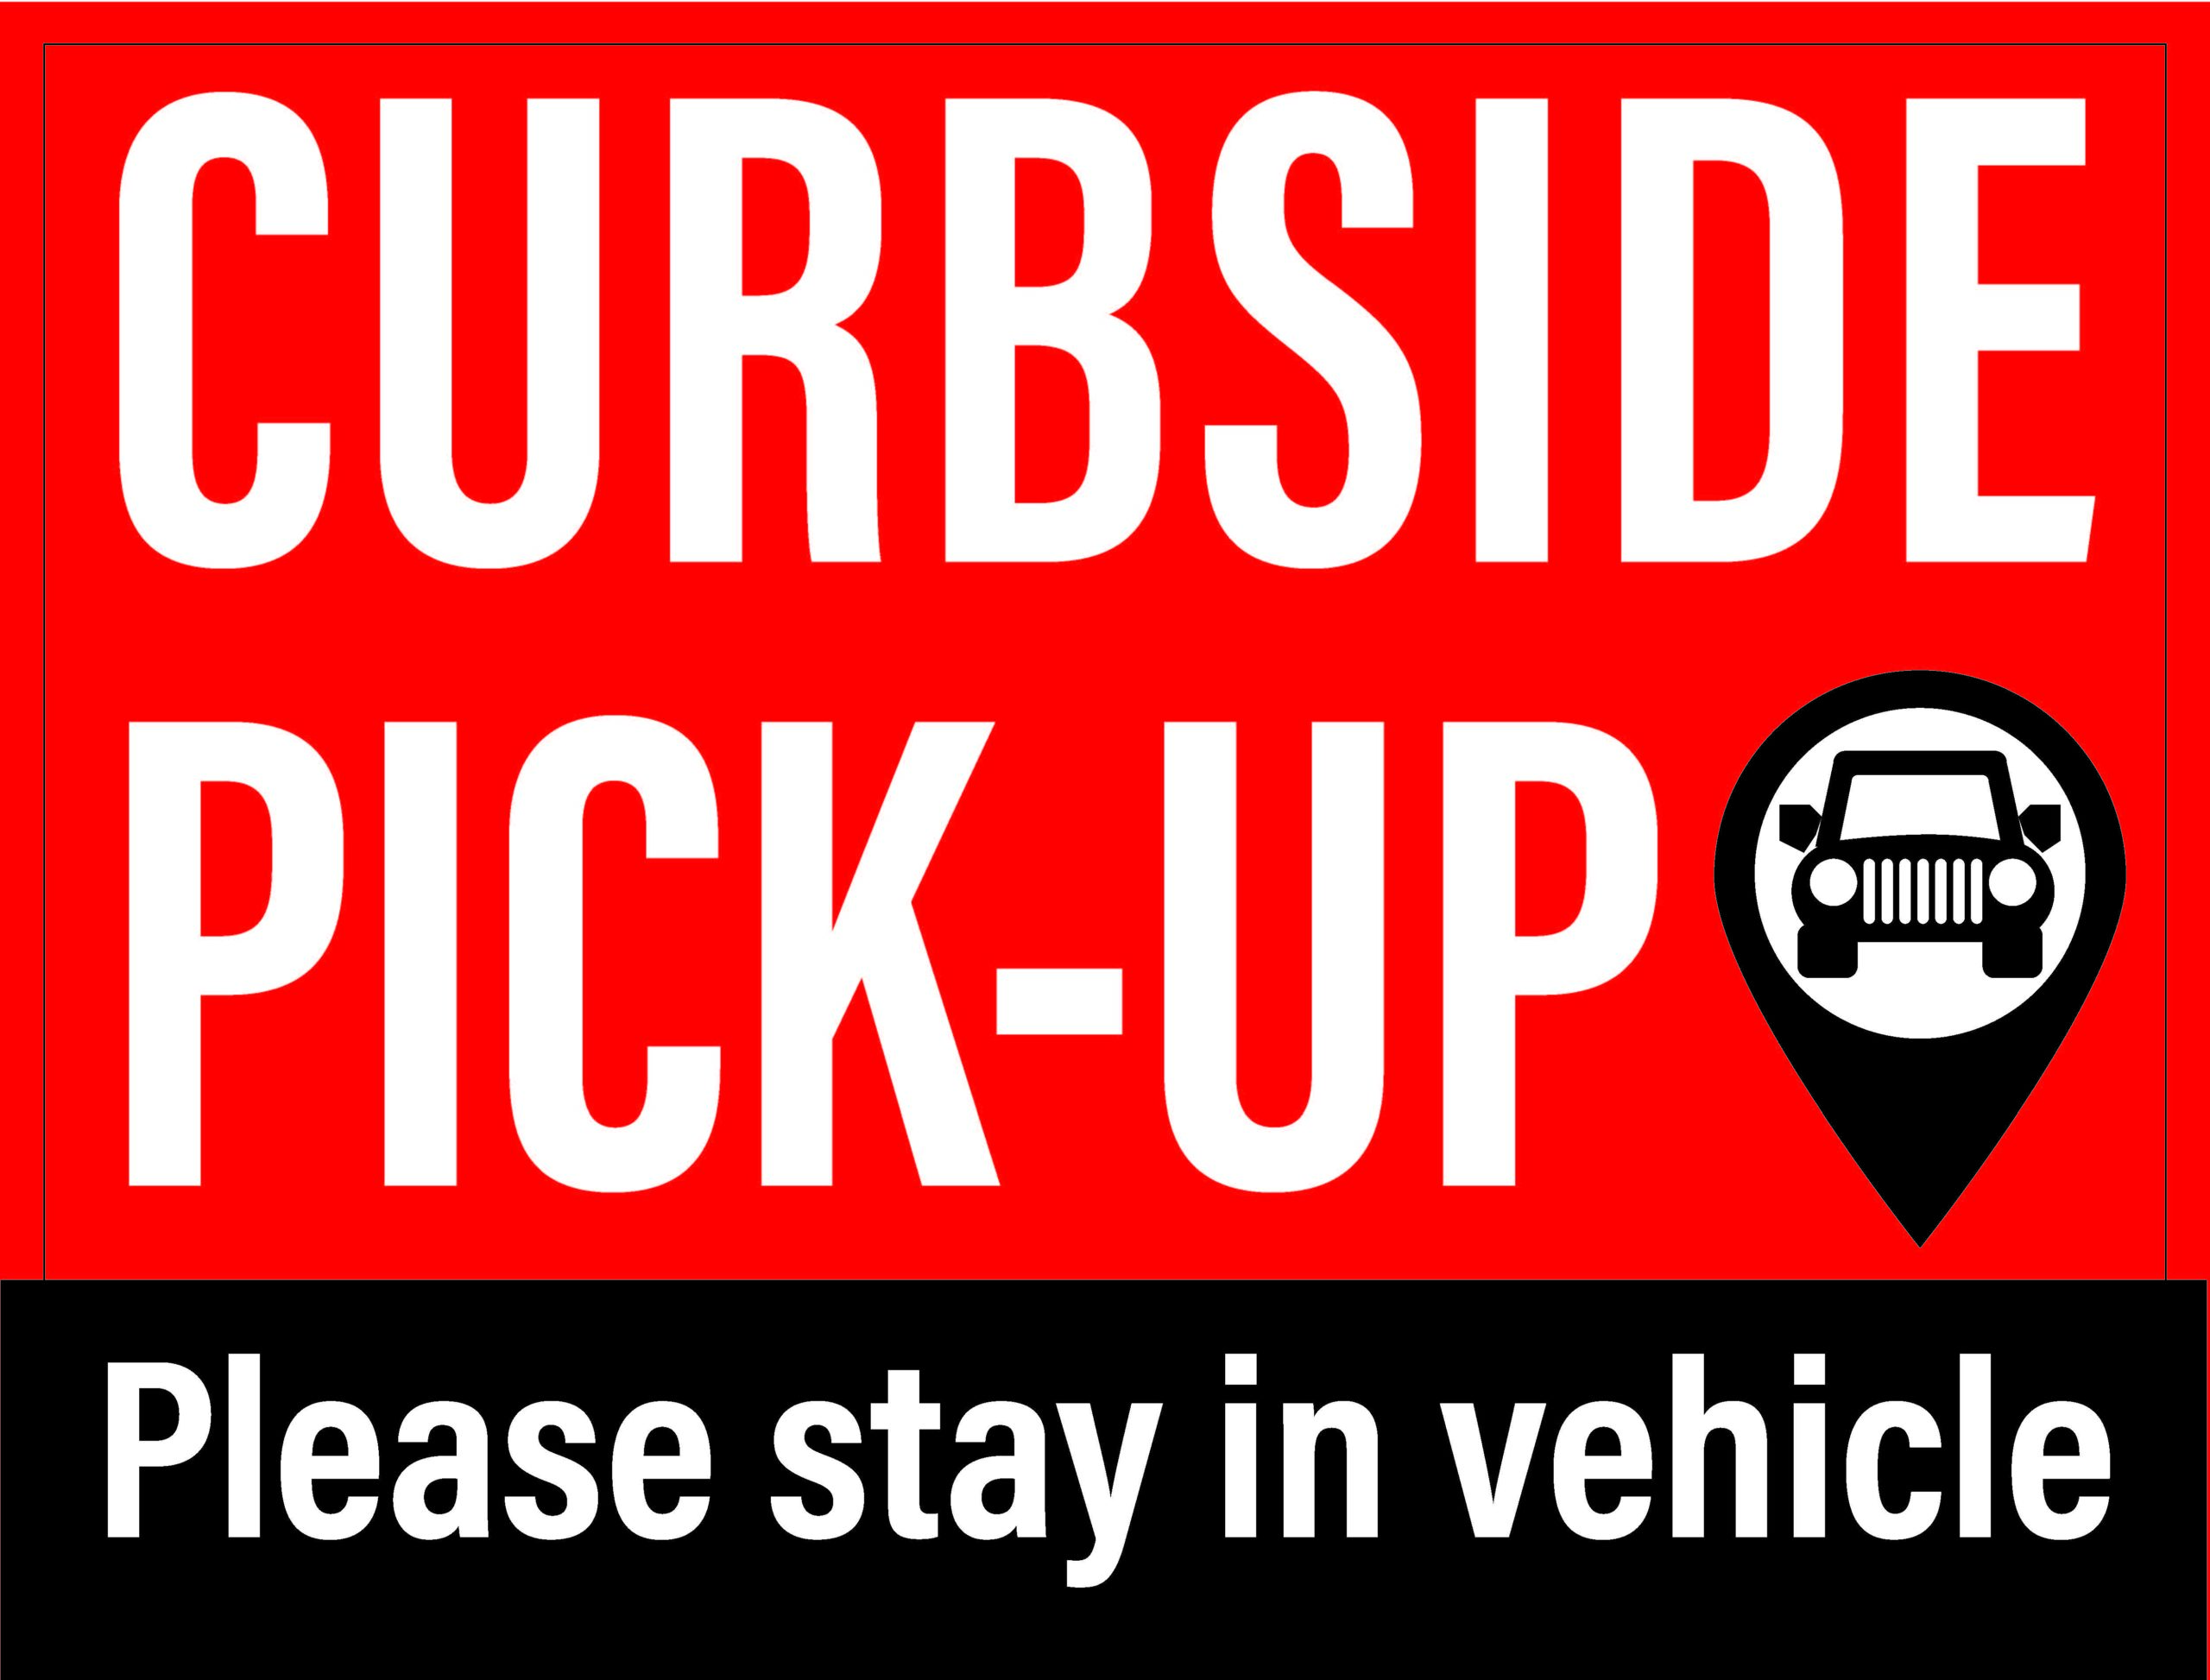 Curbside Pickup Signs (Set of 5) 18x24"